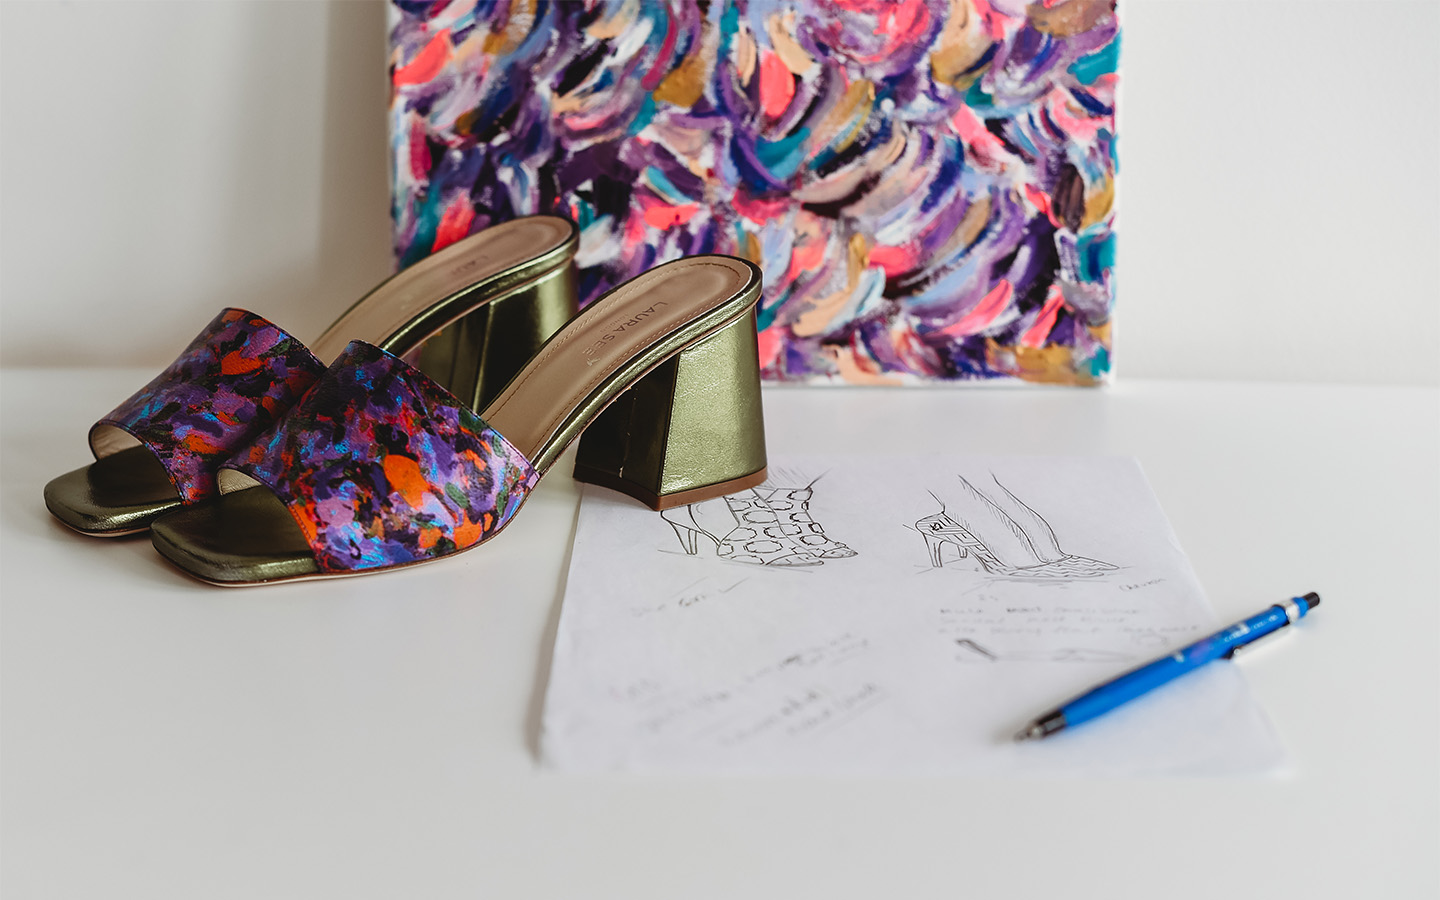 Each Laura See shoe features the brand's signature flash of artwork and a gold hummingbird on the sole